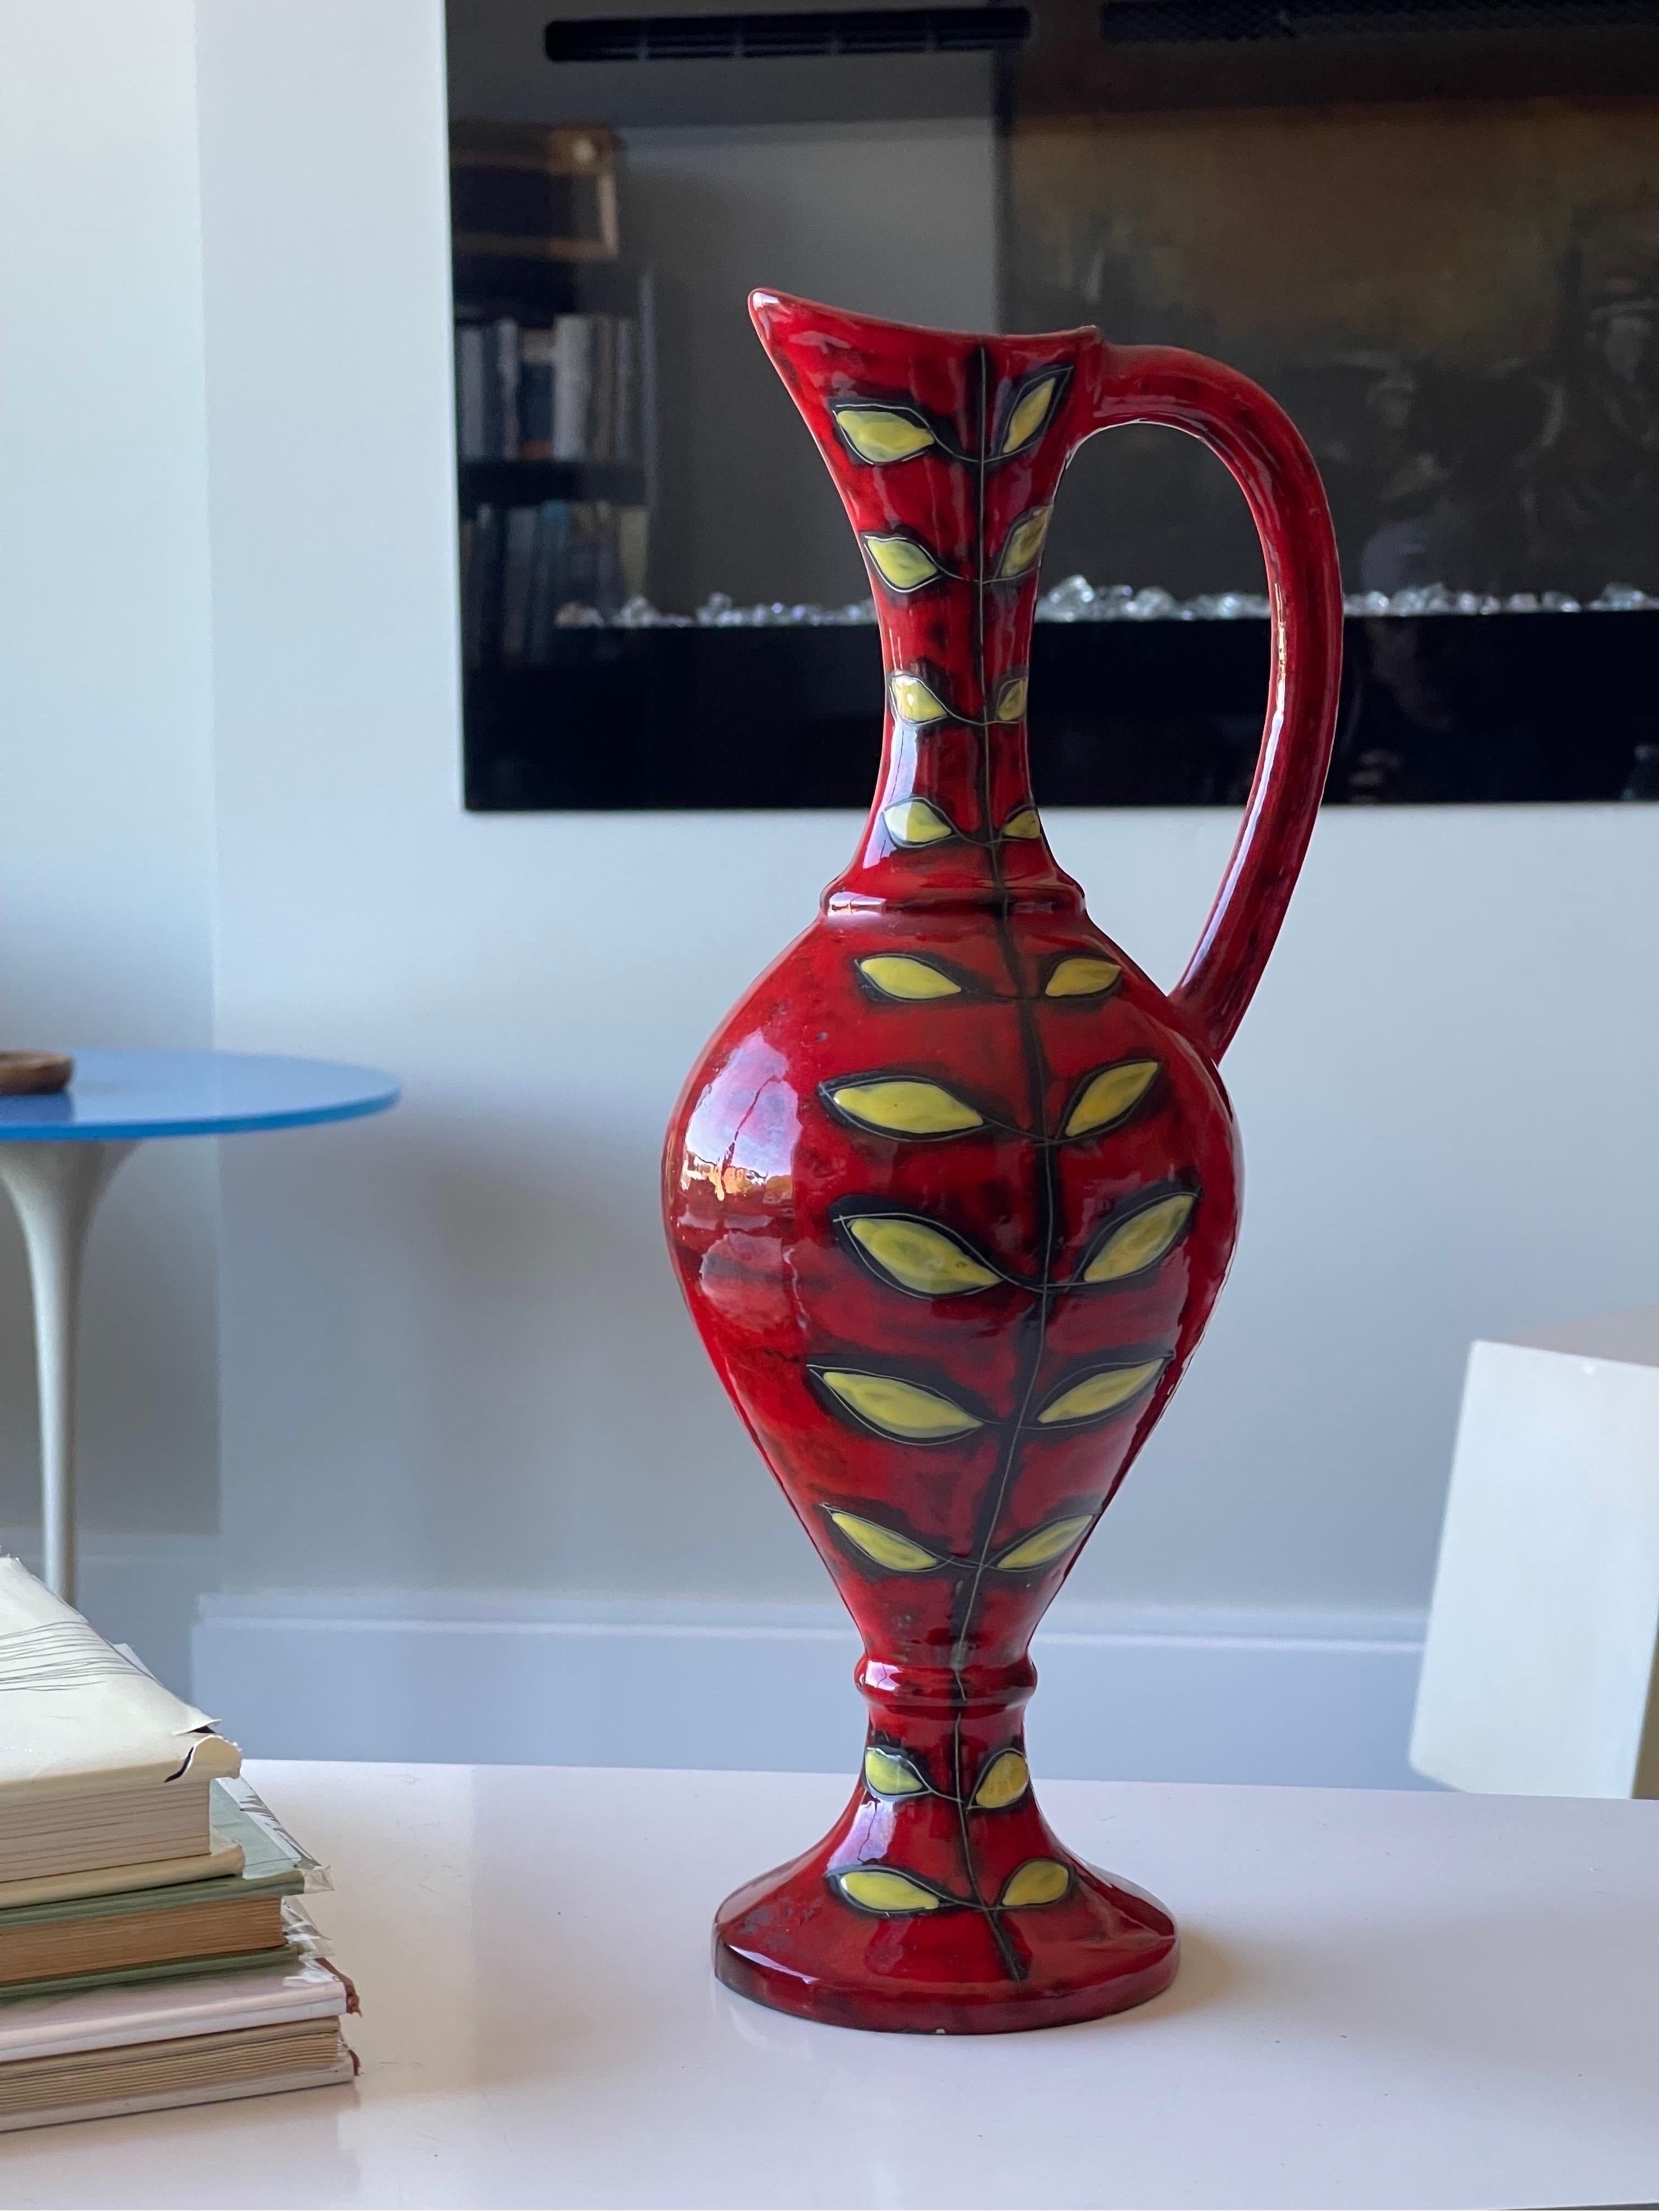 Excellent Mod vase or pitcher by Fantoni for Raymor - 1960’s Italian Ceramics. Imported from Italy. 13.25” tall x 6” deep x 5.75” wide. Striking form and colors. I love this one. So much personality in this piece. Great eye catcher for the